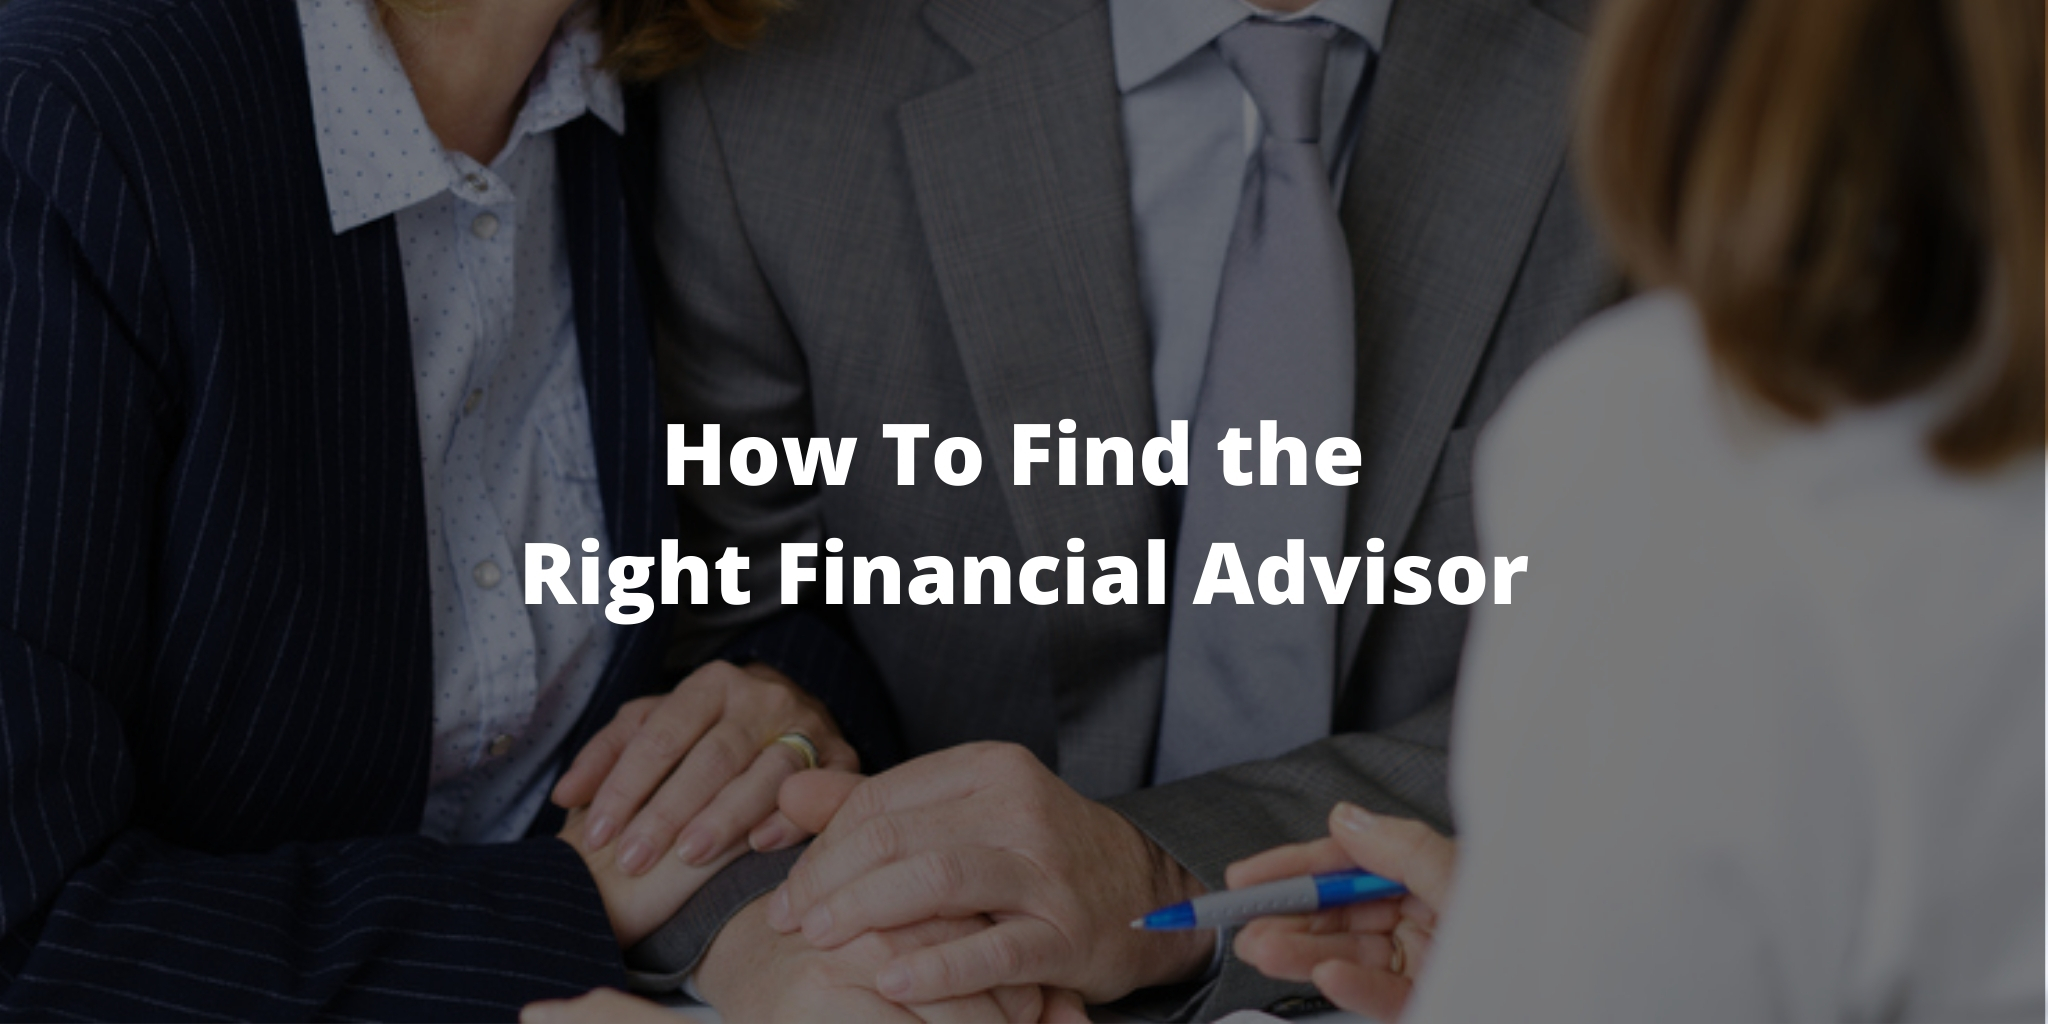 How To Find the Right Financial Advisor